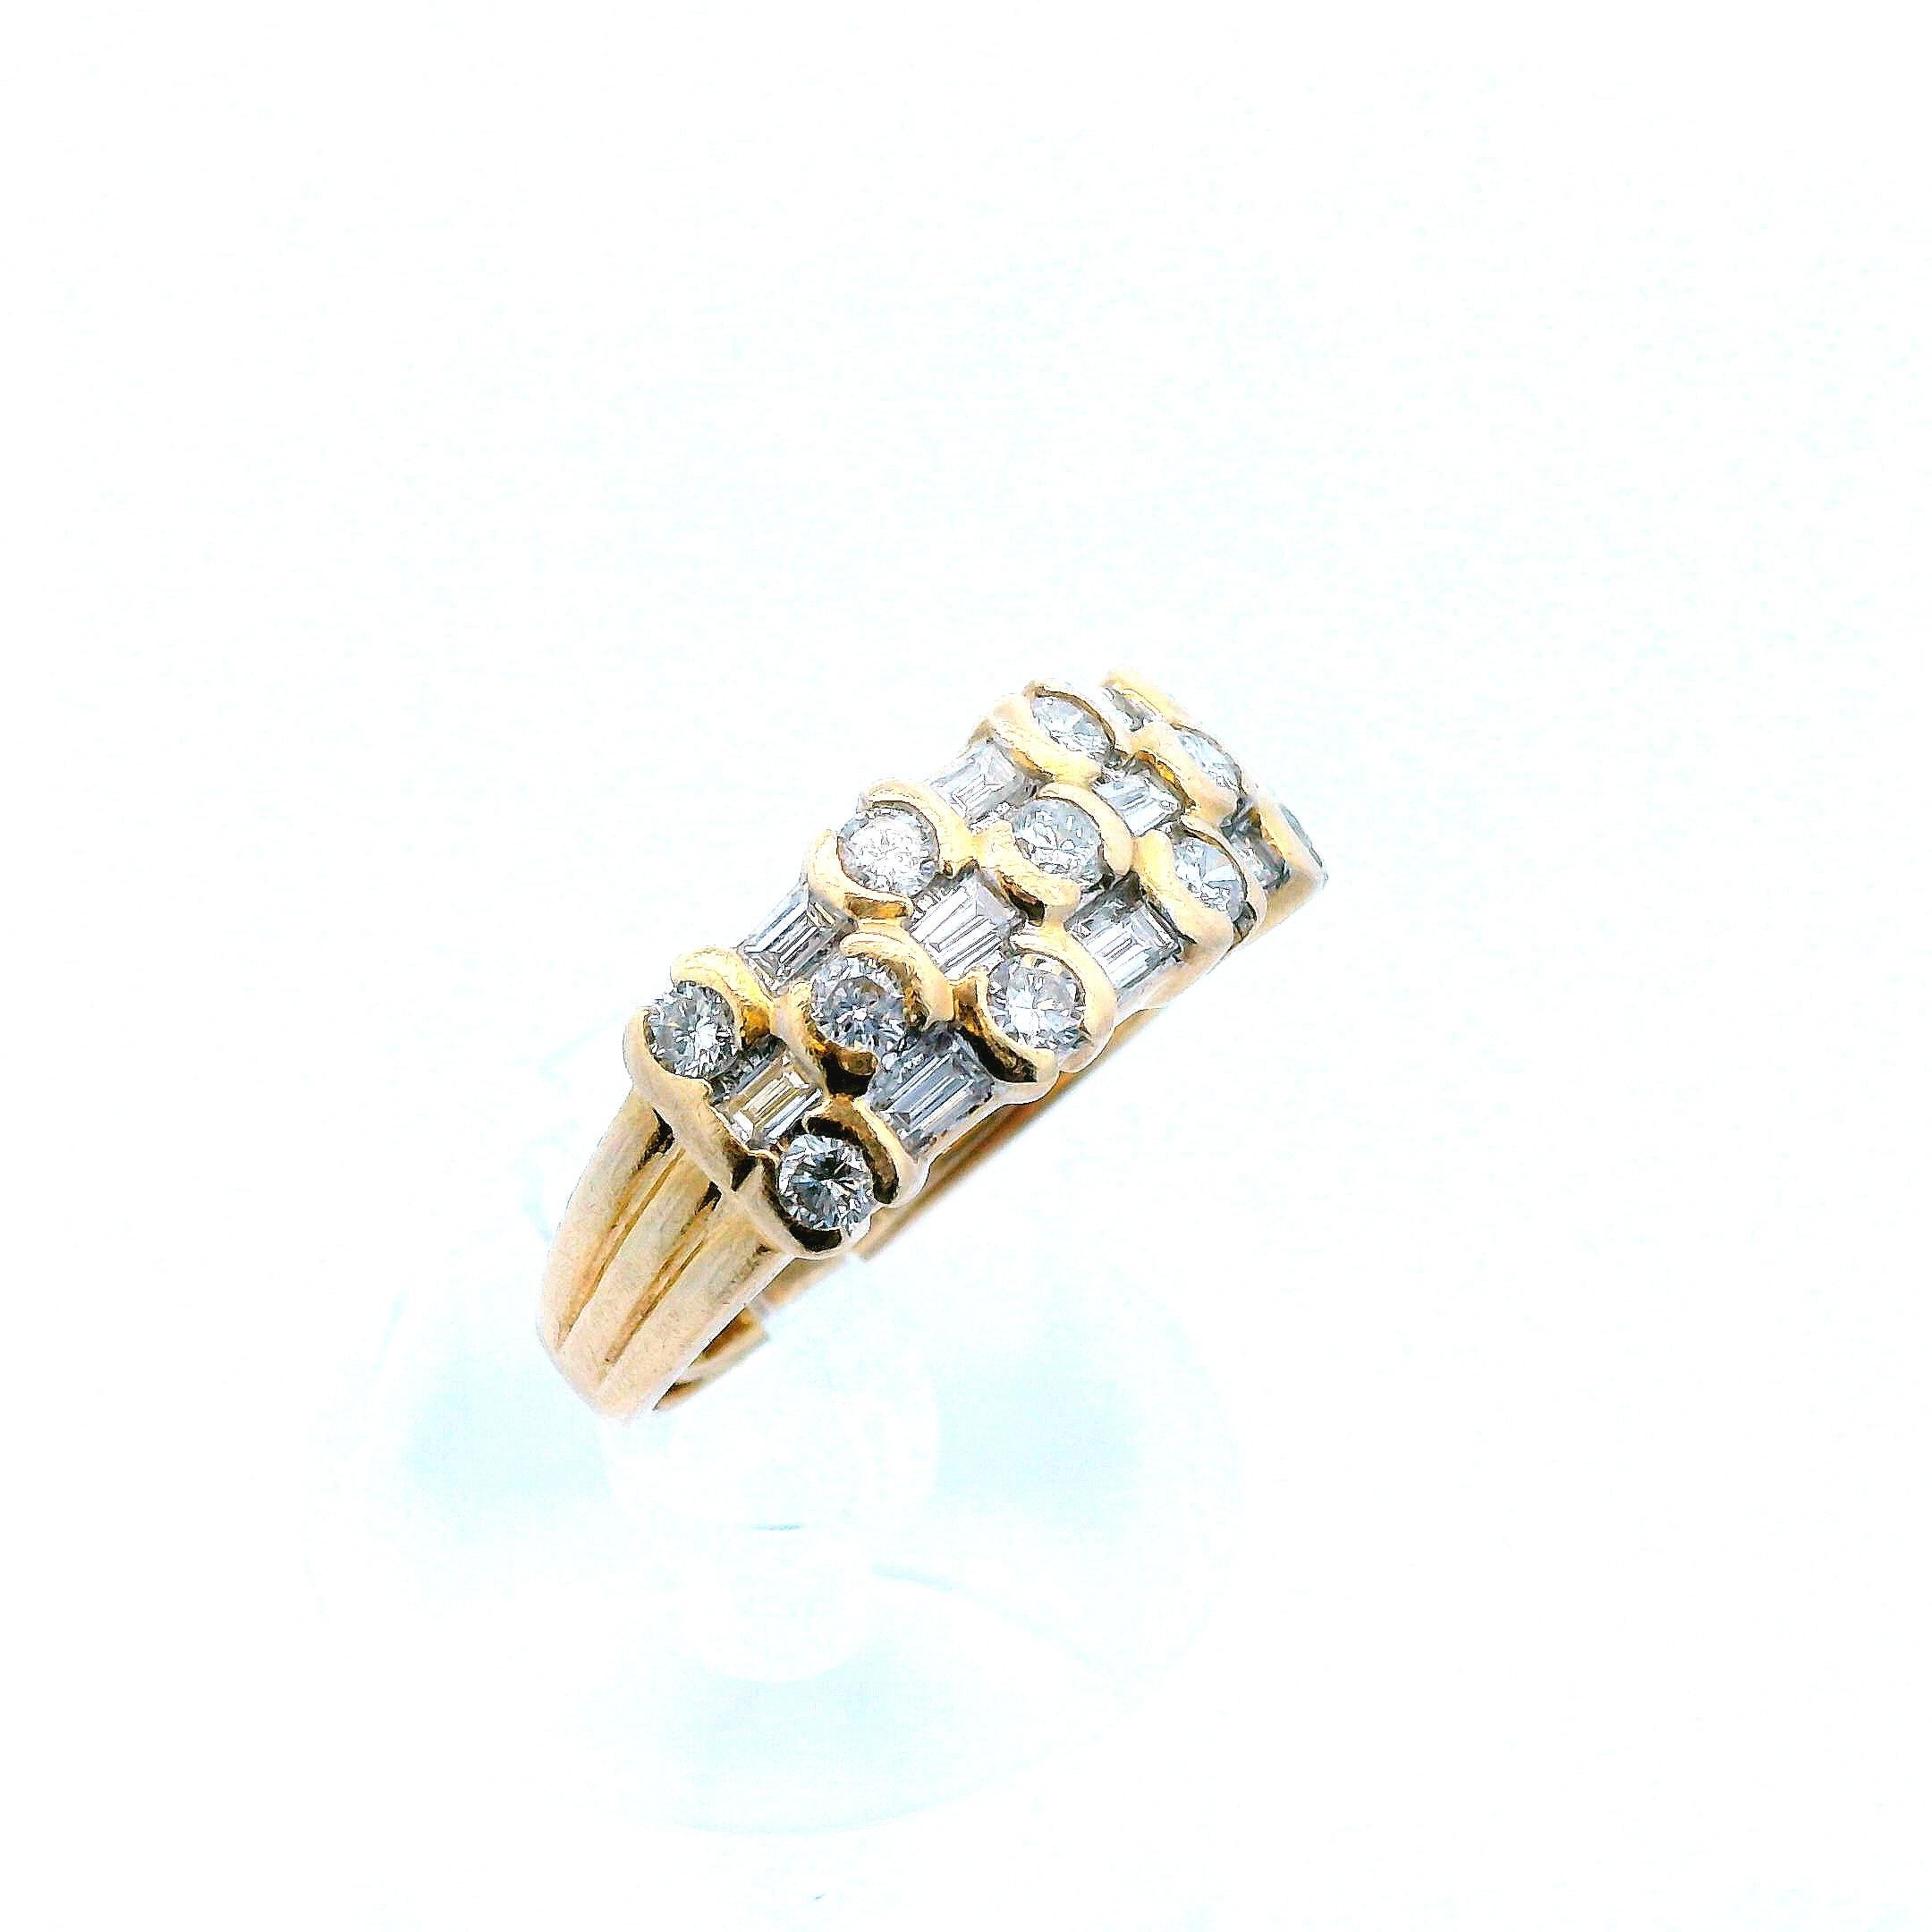 This contemporary ring, made in 14k yellow gold and featuring both baguette and round cut diamonds, is incredible. The unique design comes from alternating layout of the baguette and round cut diamonds and creates a nugget look that gives the ring